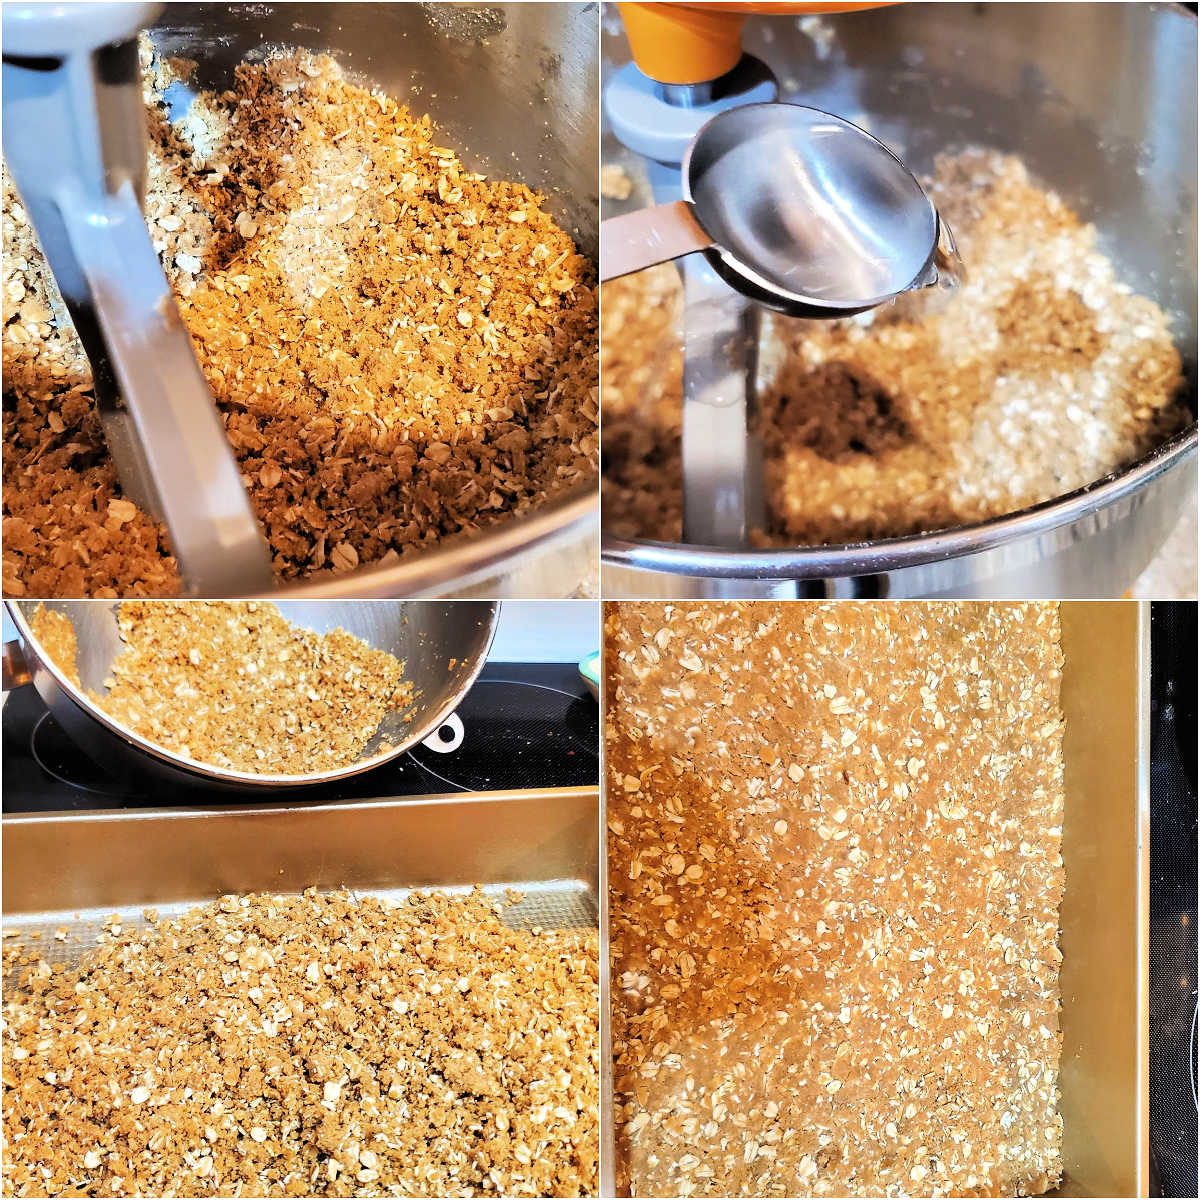 A collage of 4 images showing the mixing of the oatmeal dough and pressing it into the pan for raisin bars.